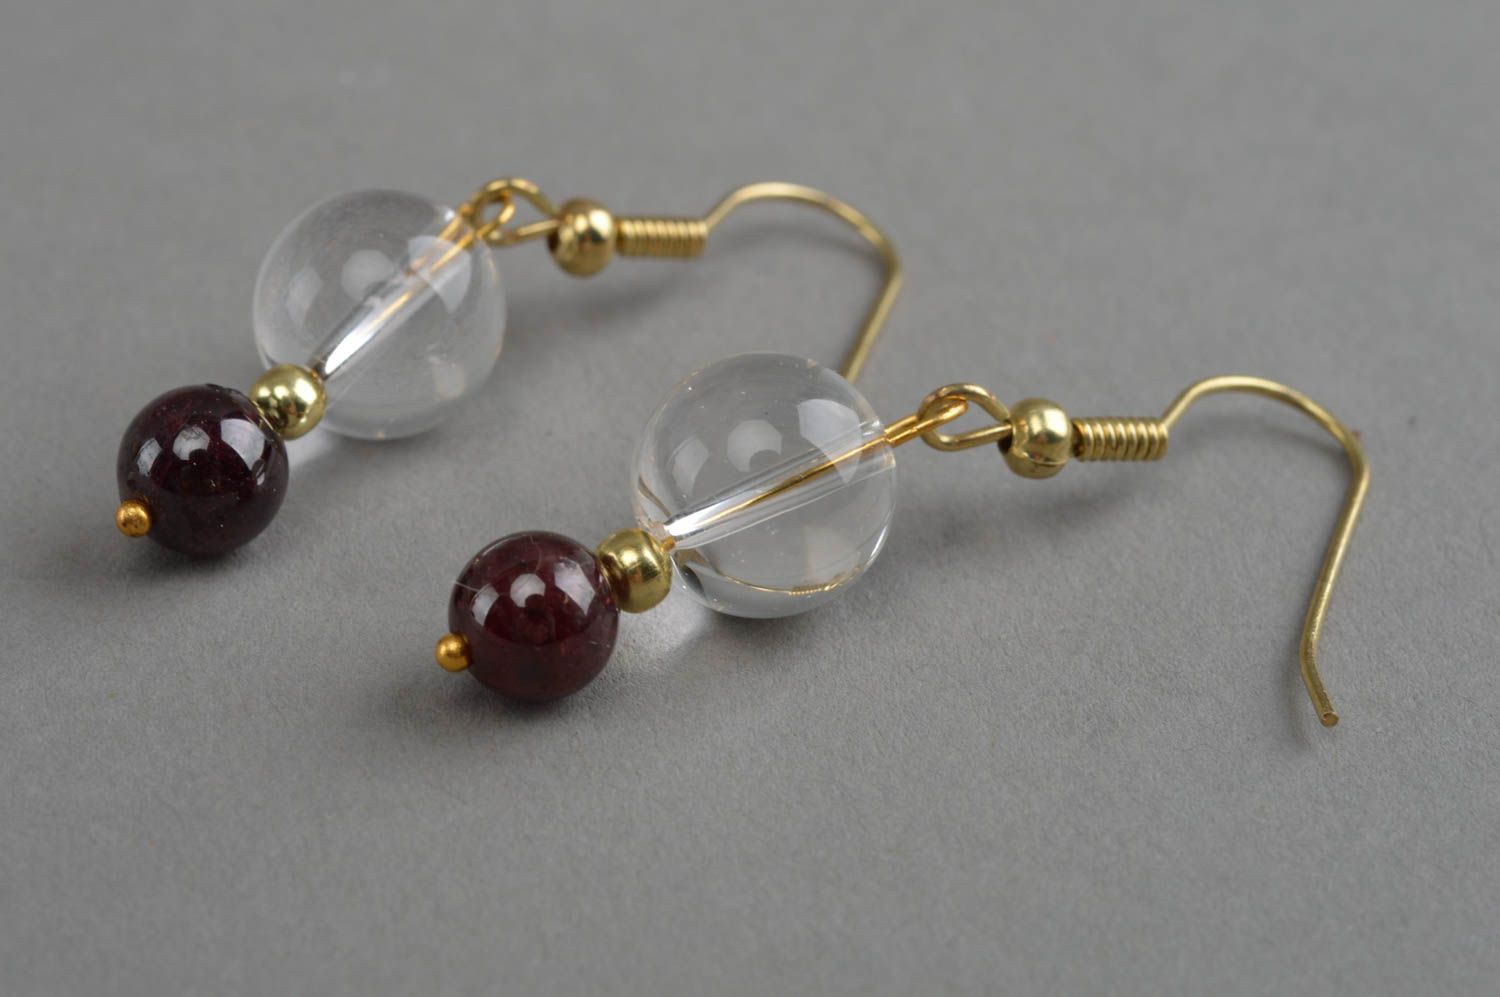 Handmade earrings with quartz accessory with natural stones designer jewelry photo 2